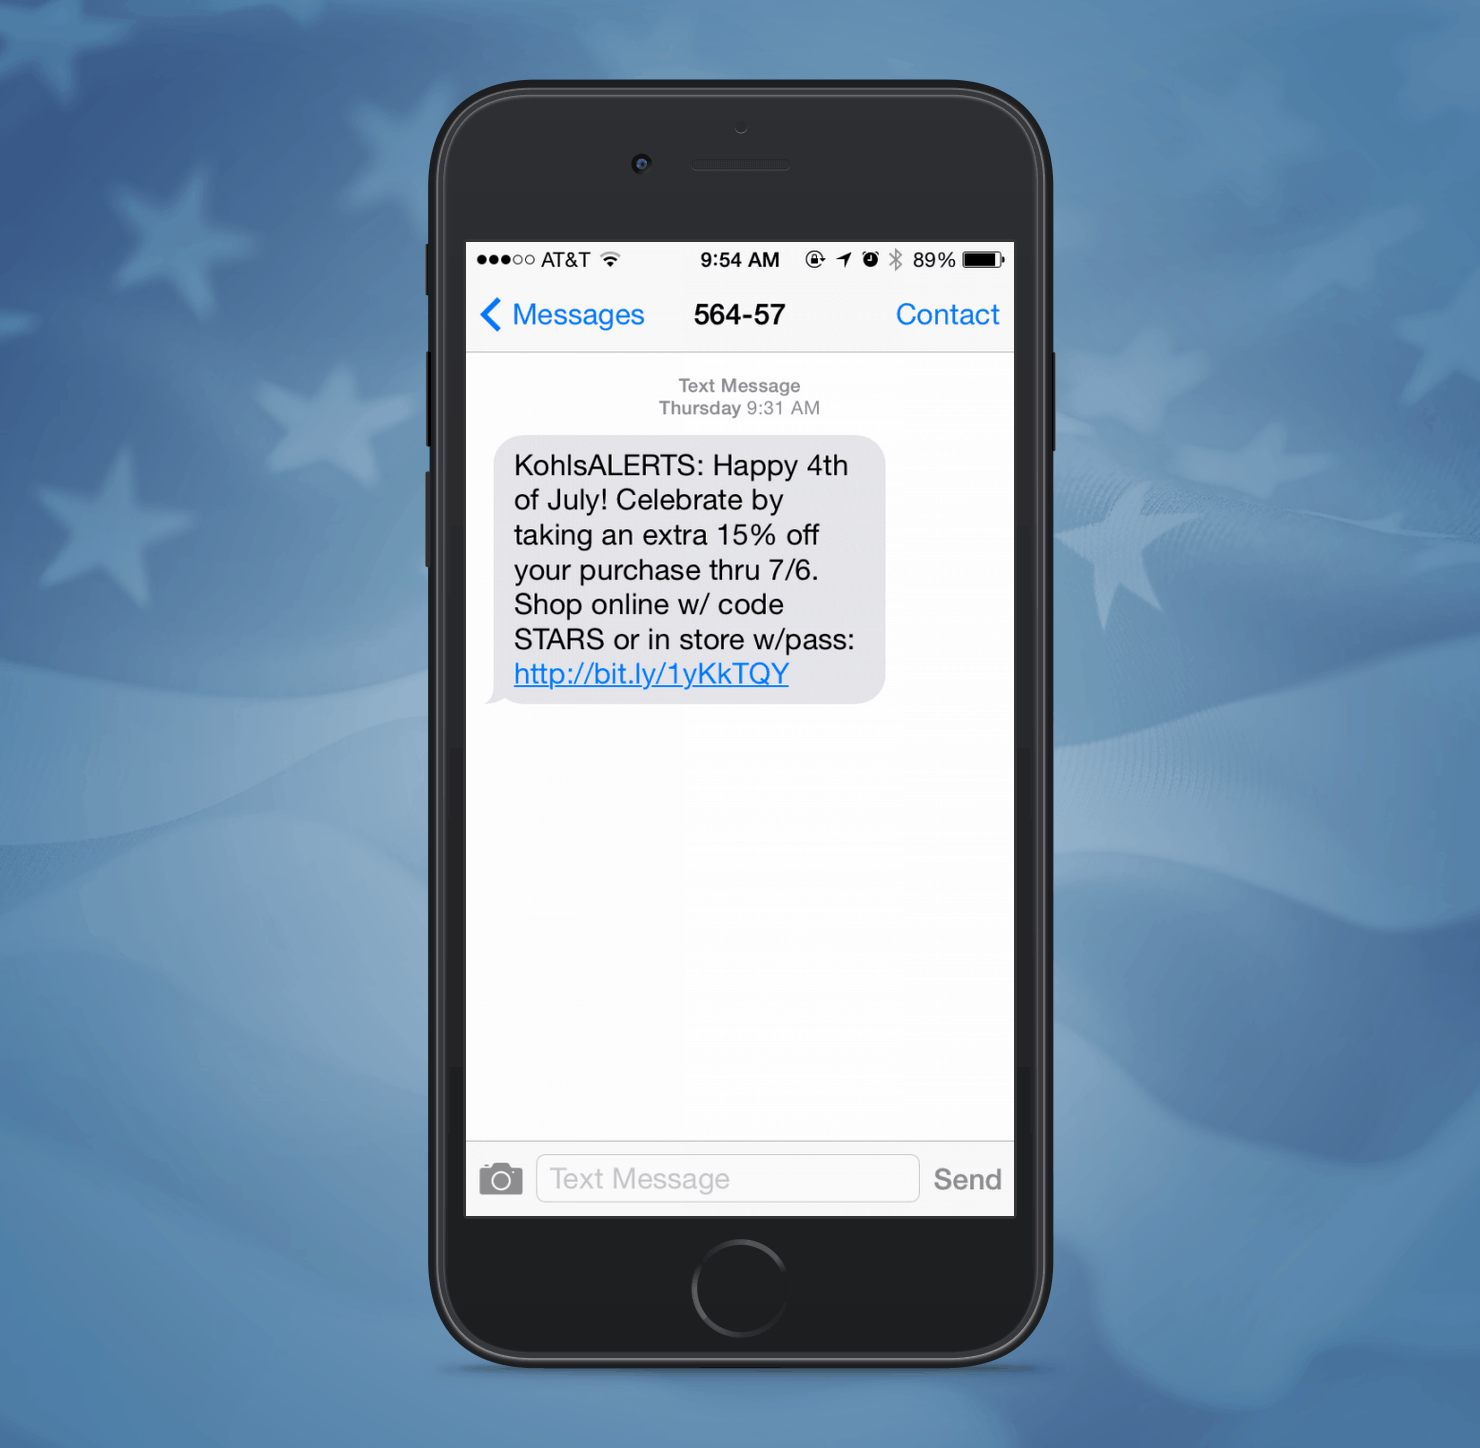 Kohls SMS Promotion Example from Independence Day